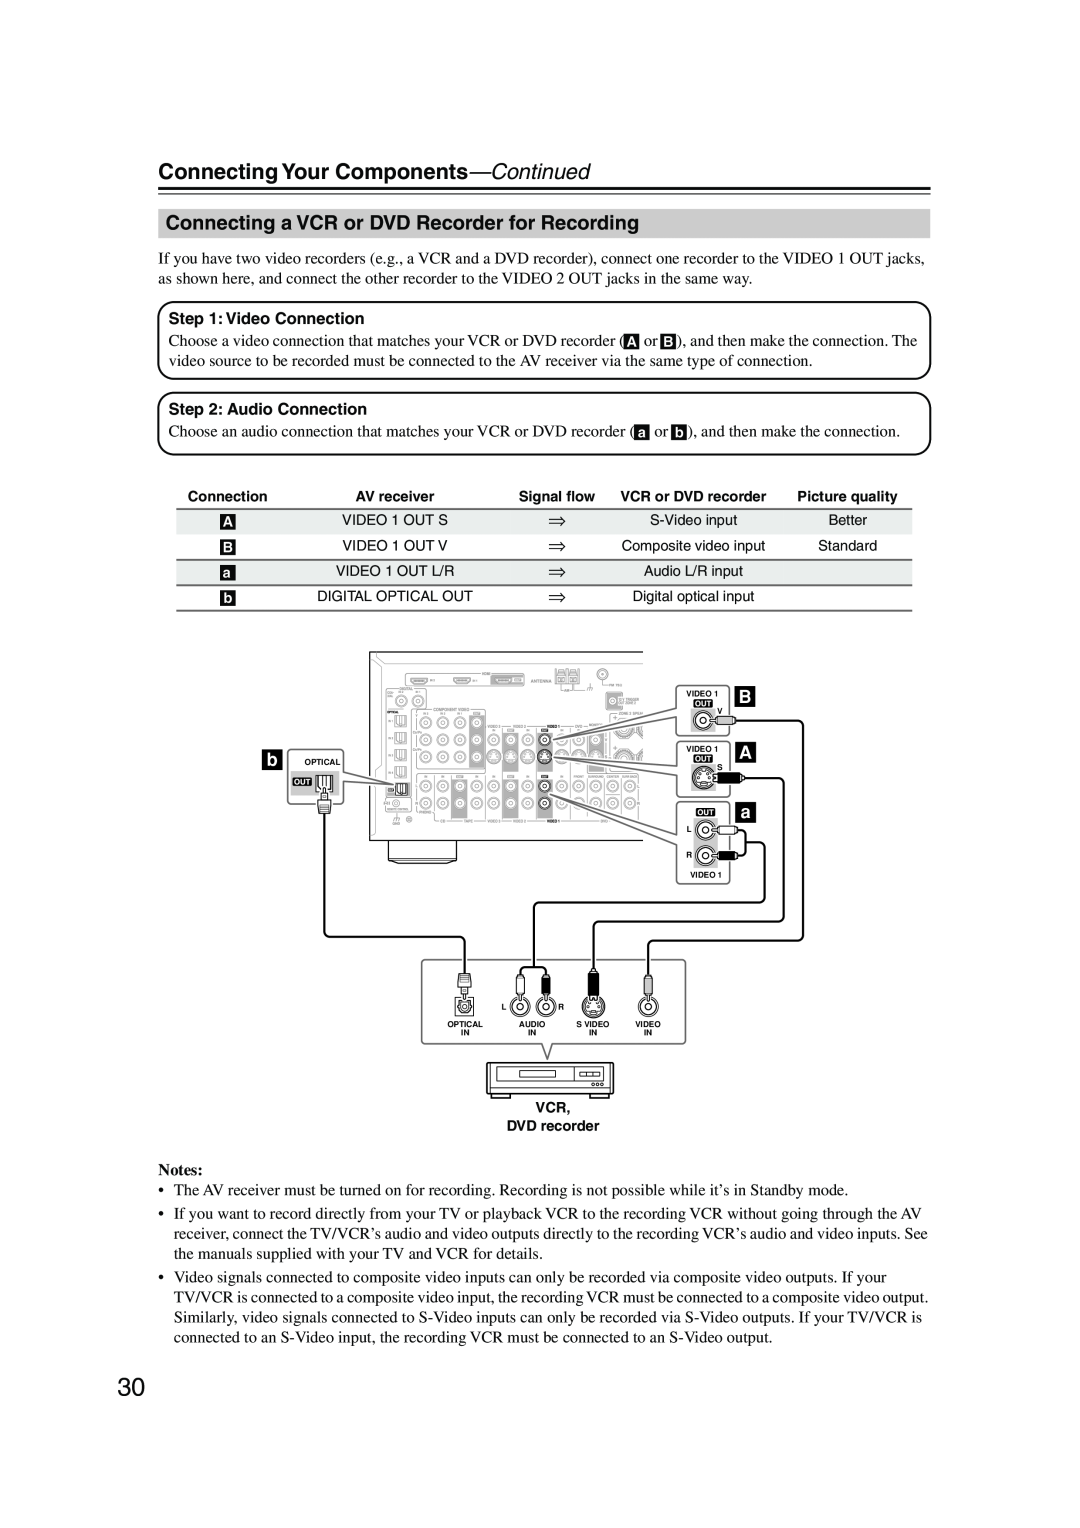 Onkyo SR804 instruction manual Connecting a VCR or DVD Recorder for Recording, Connecting Your Components—Continued, Notes 